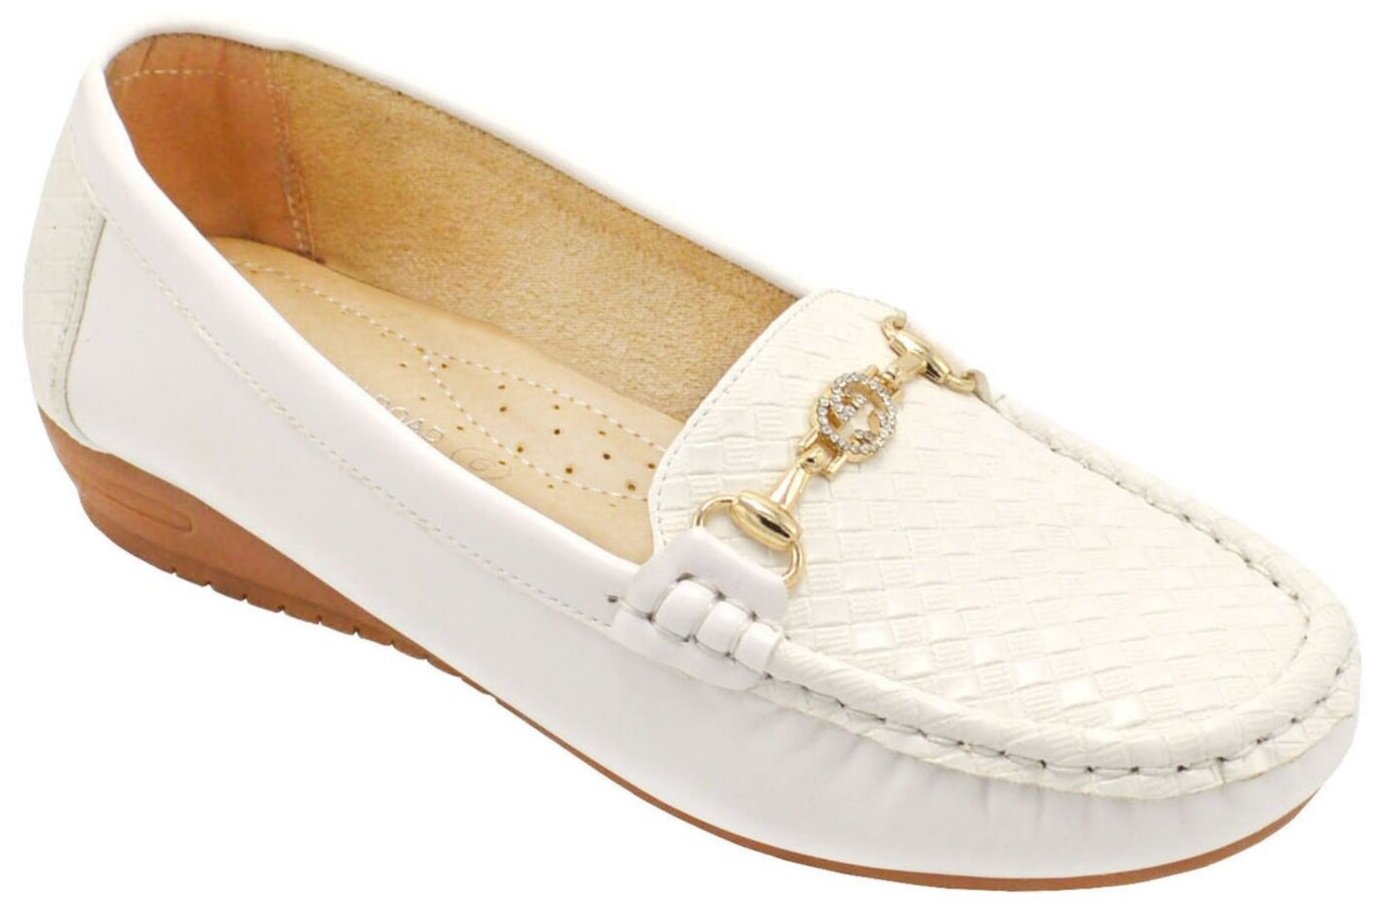 Wholesale Women's Shoes Loafer Ladies Slip On Catalina NG61